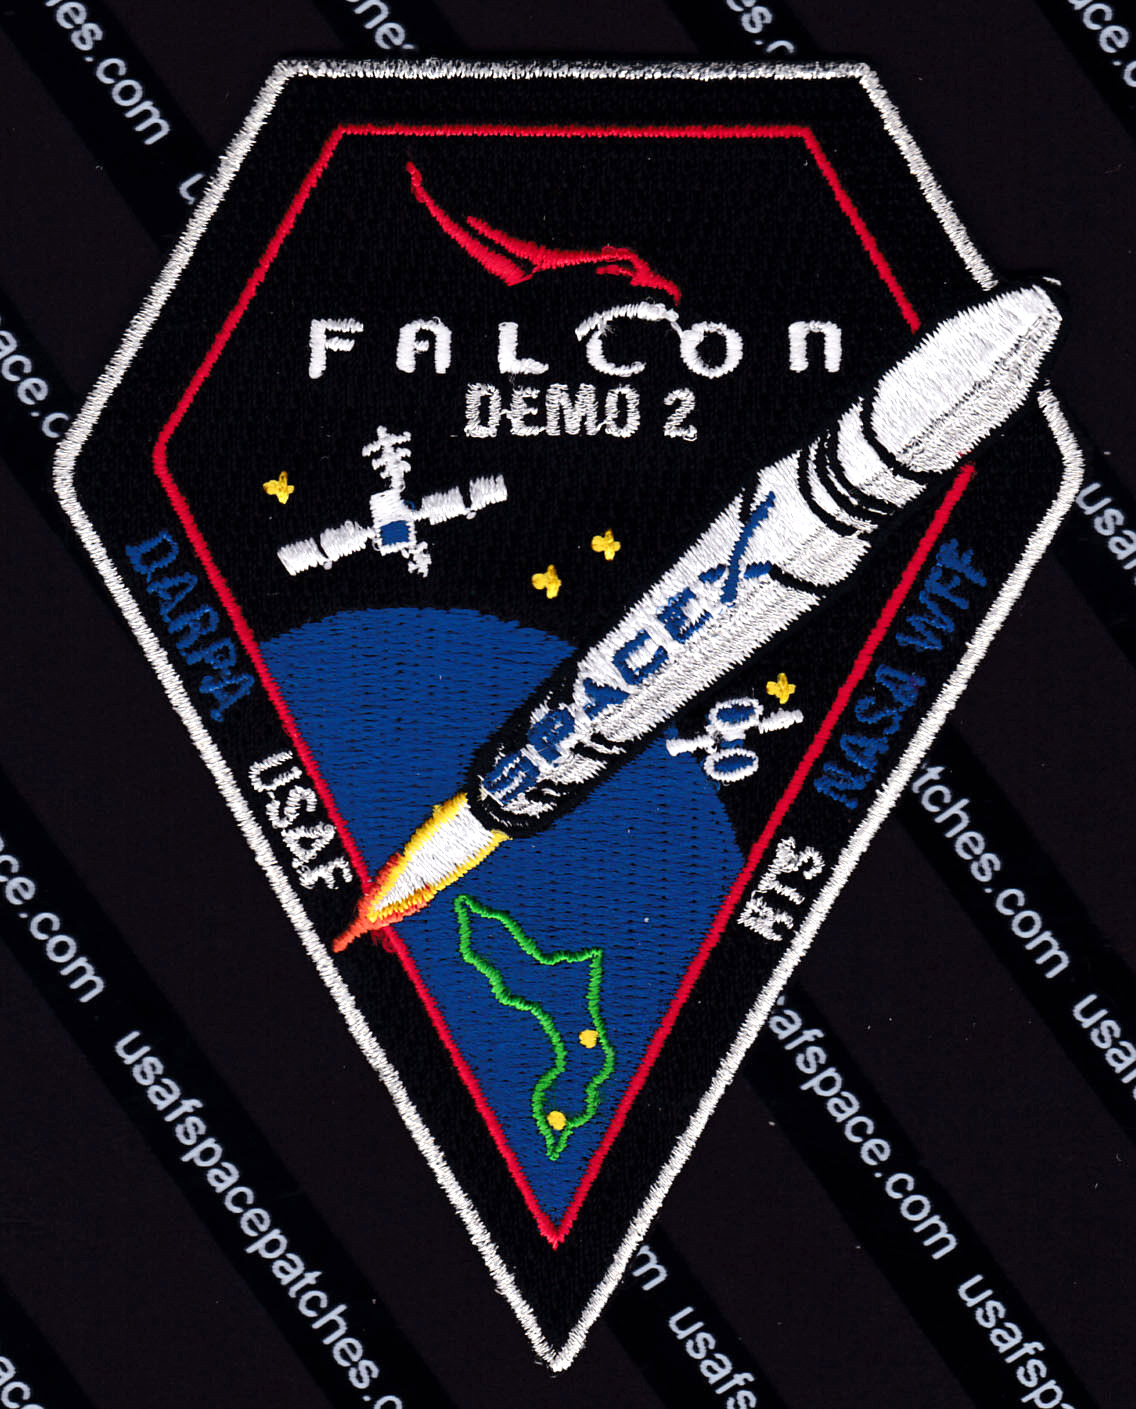 Authentic FALCON DEMO 2 SPACEX DARPA USAF RTR NASA ORIGINAL SPACE Mission PATCH